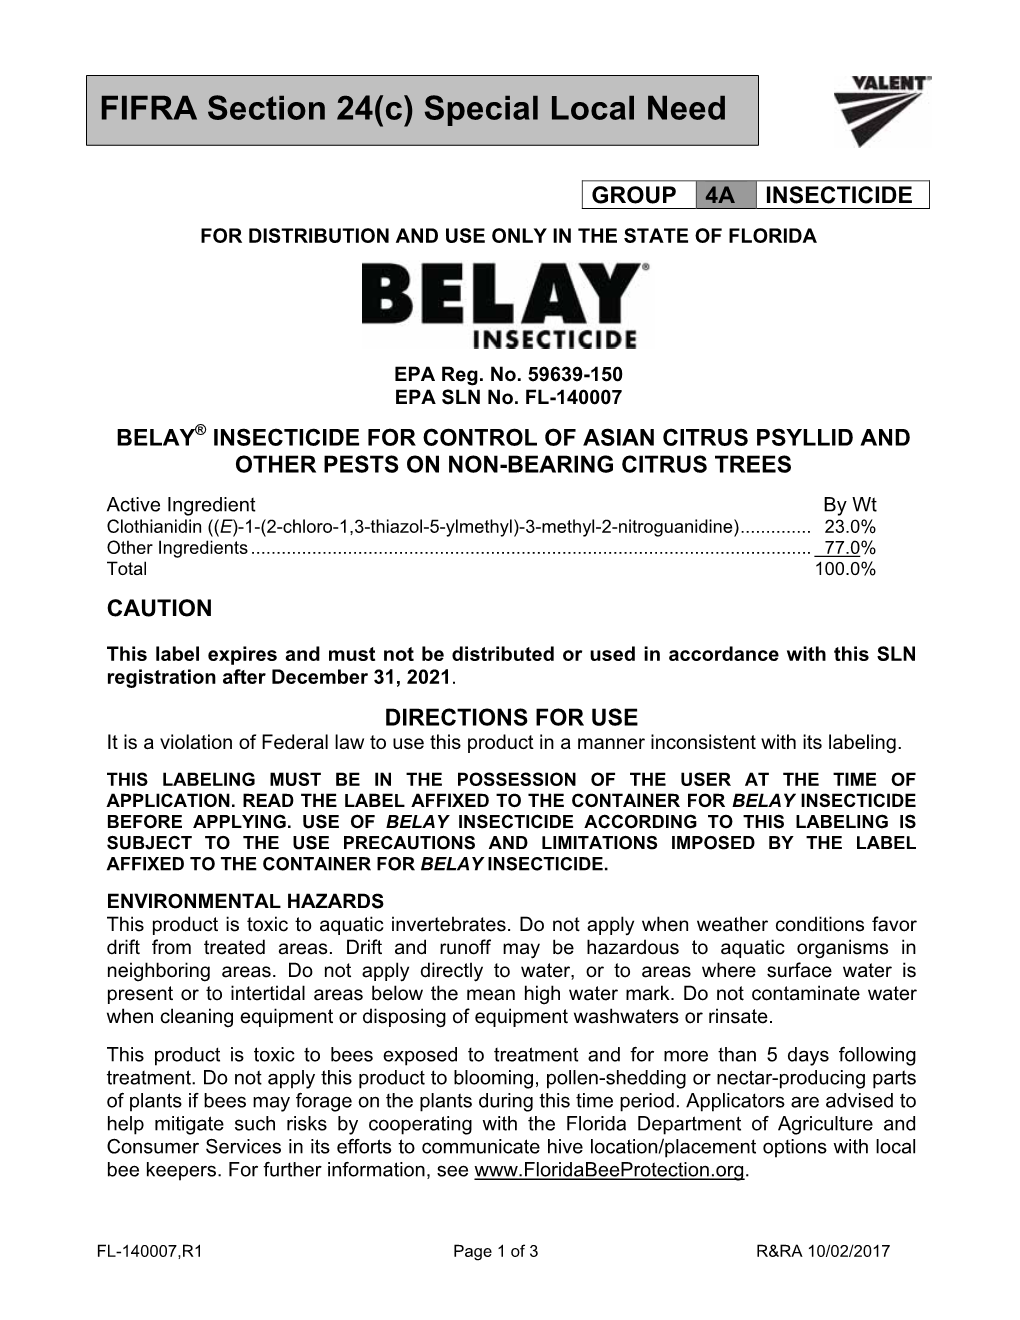 Belay Insecticide Section